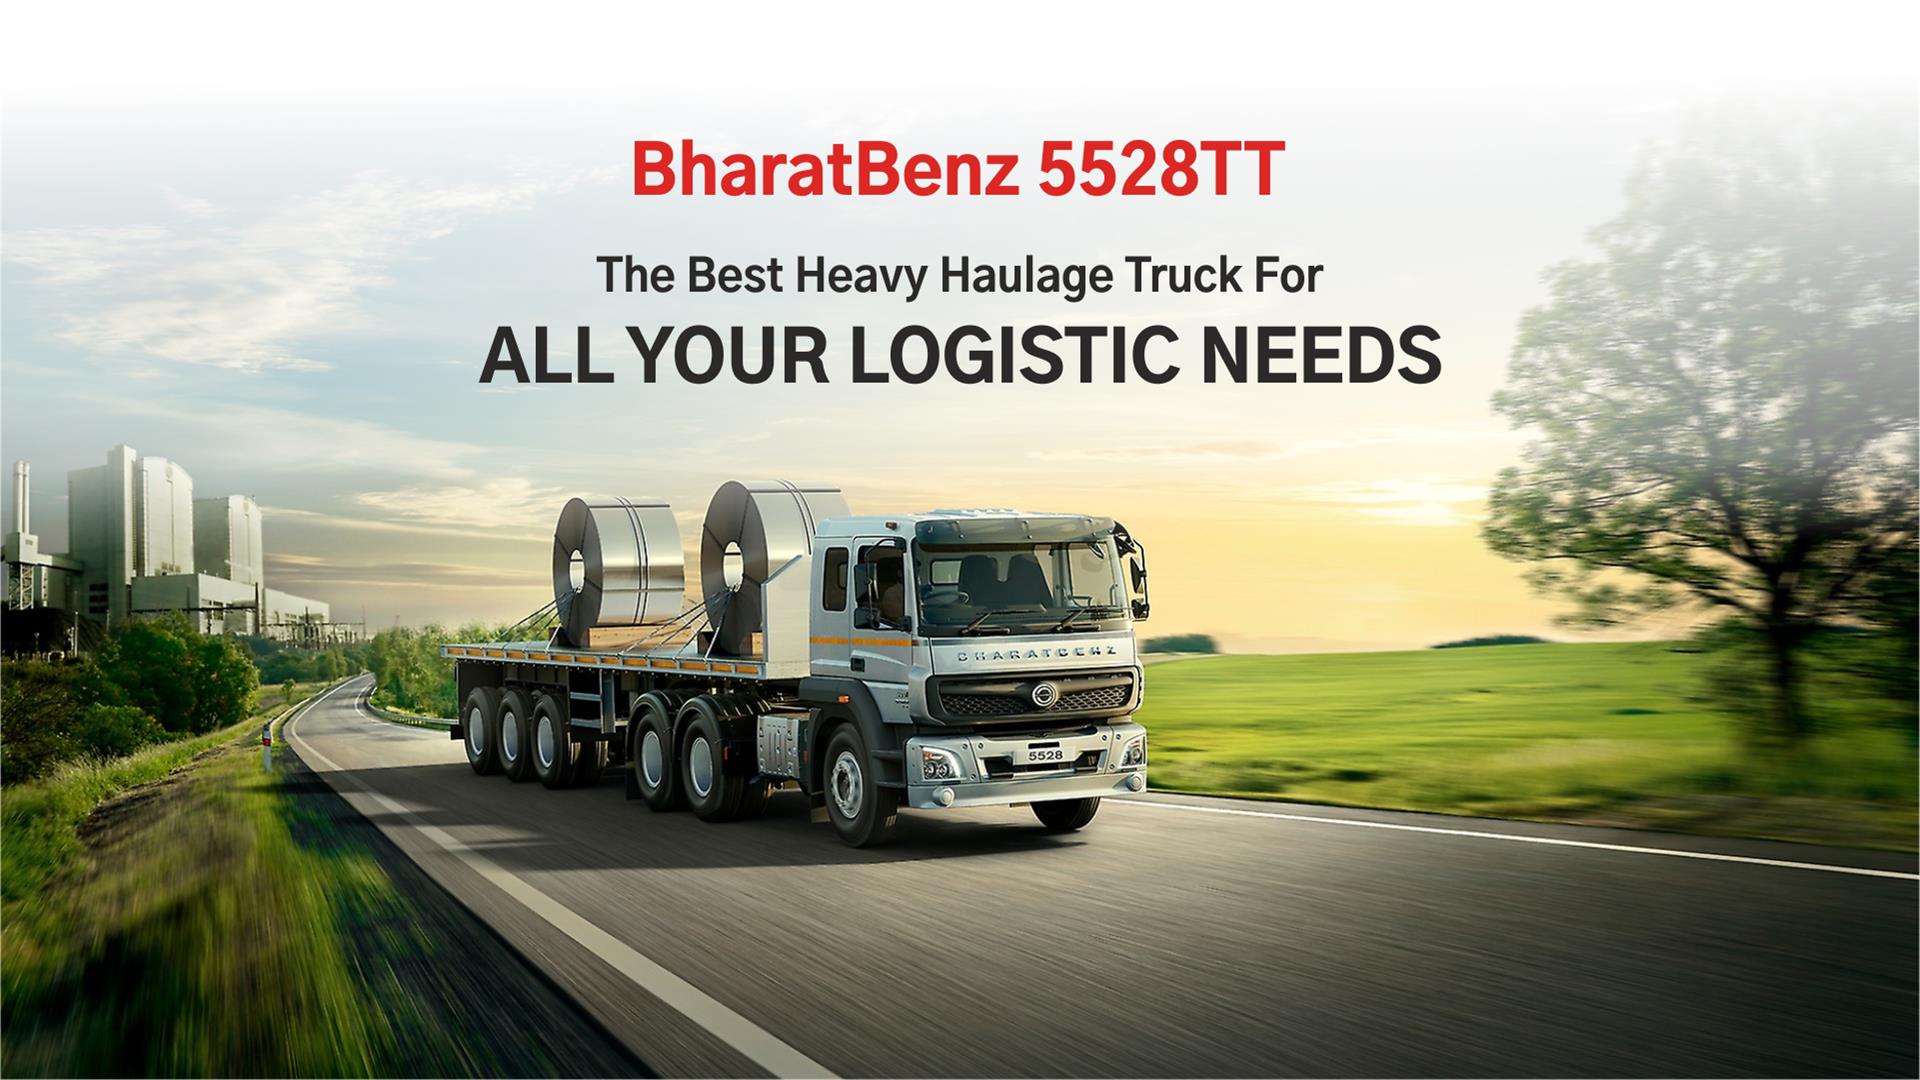 BharatBenz 5528TT: The best heavy haulage truck for all your logistic needs